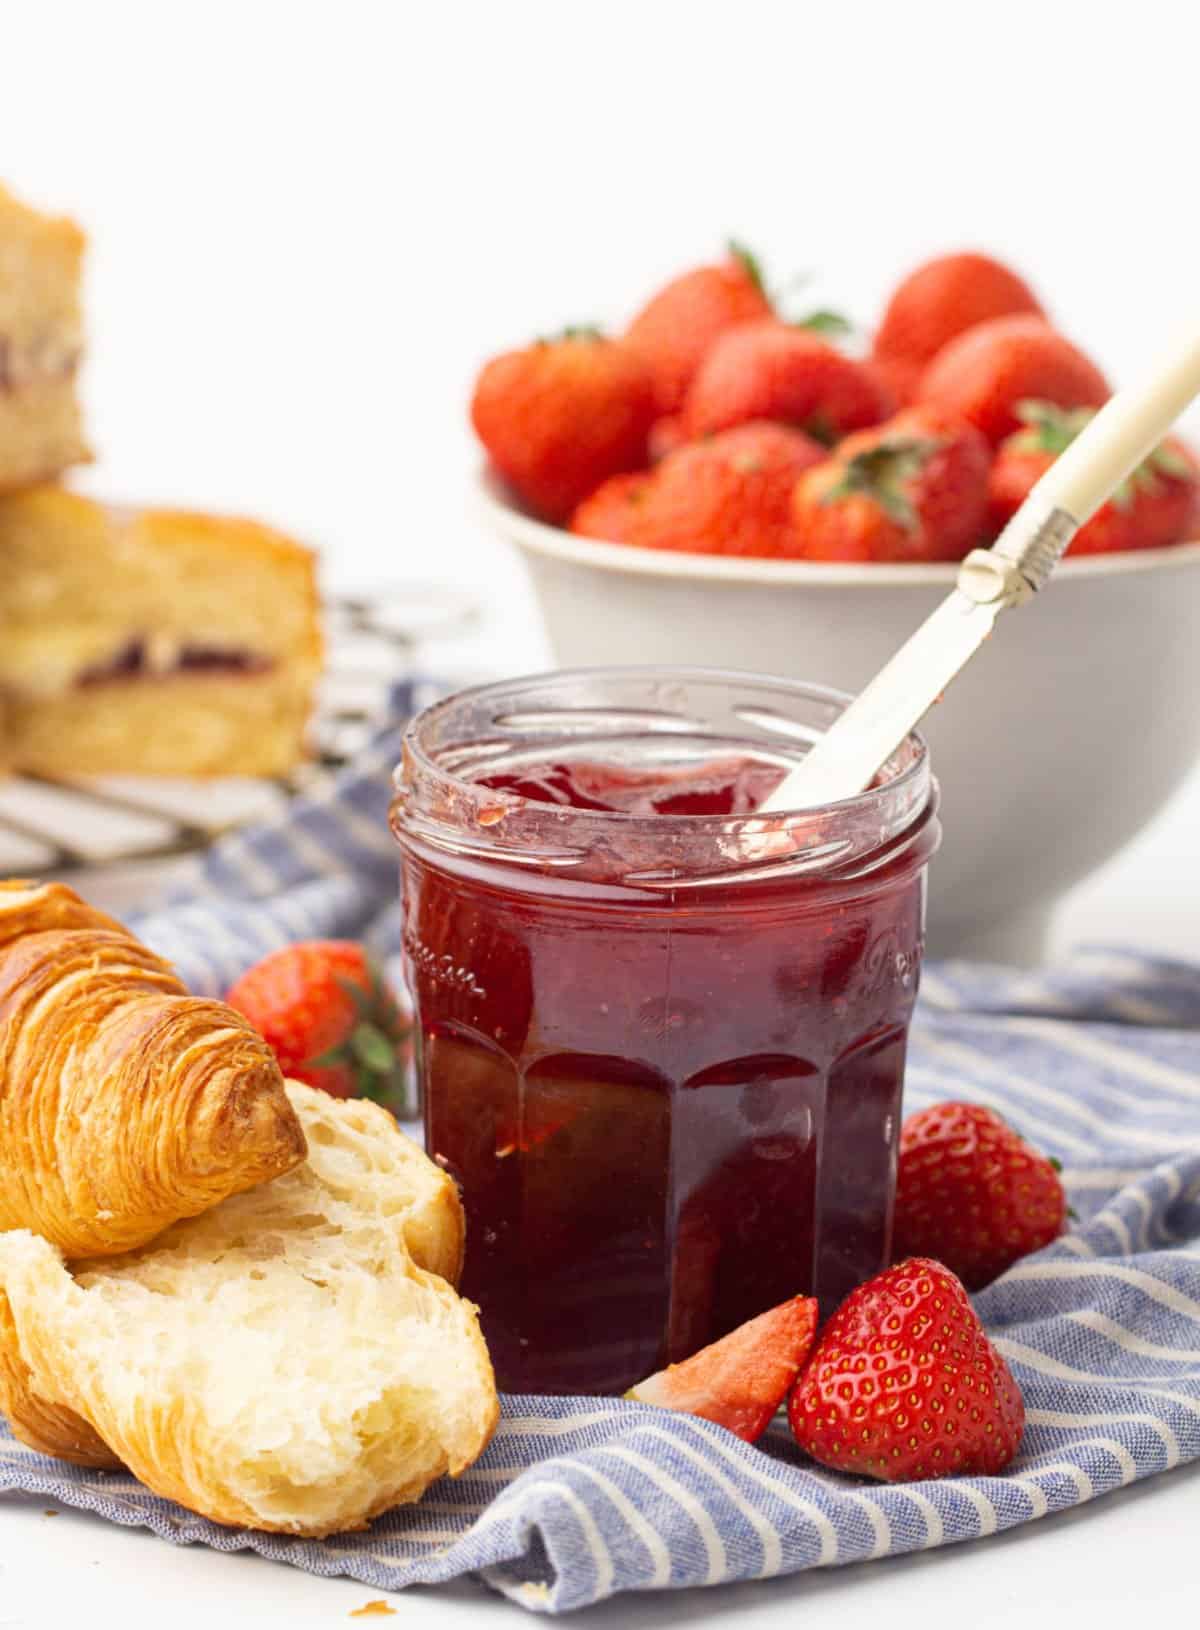 Strawberry jam in a jar with croissants.